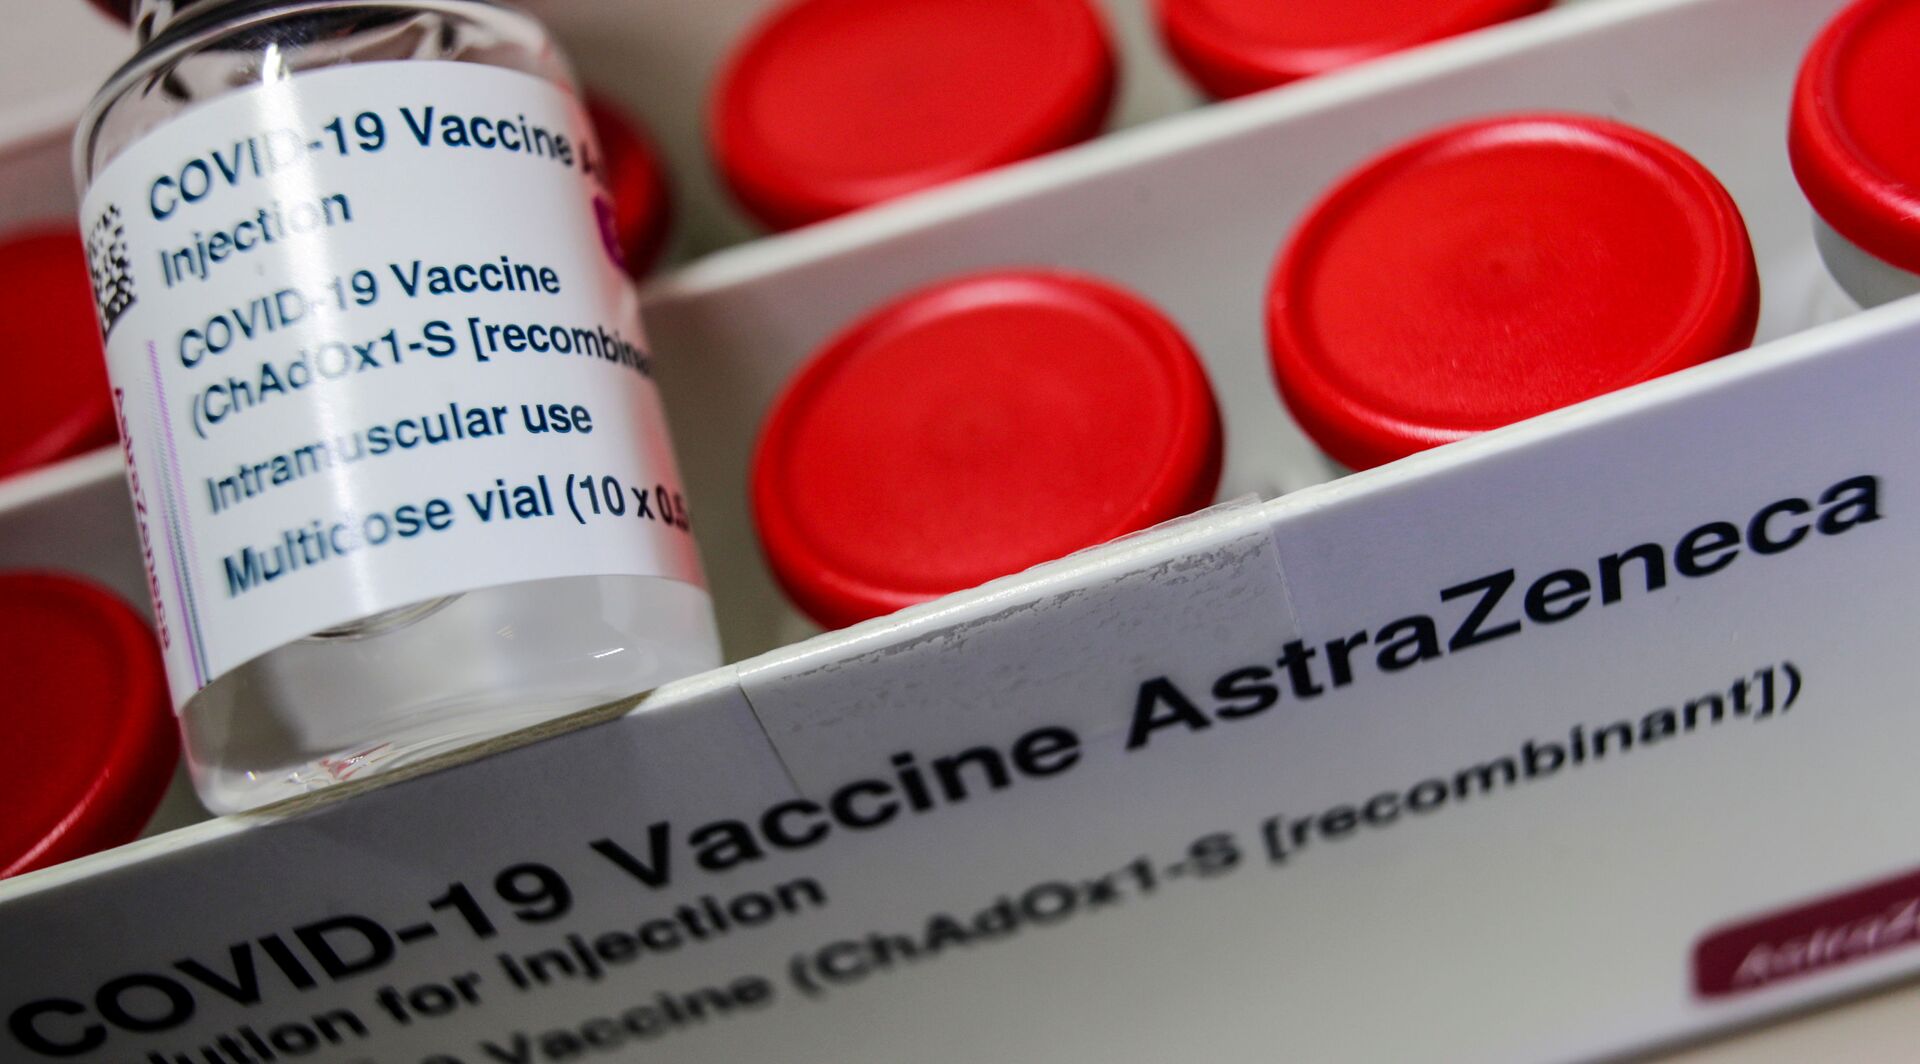 AstraZeneca to Defend Itself in Court as EU Sues It for Alleged Failure to Deliver on Vaccine Deal - Sputnik International, 1920, 26.04.2021